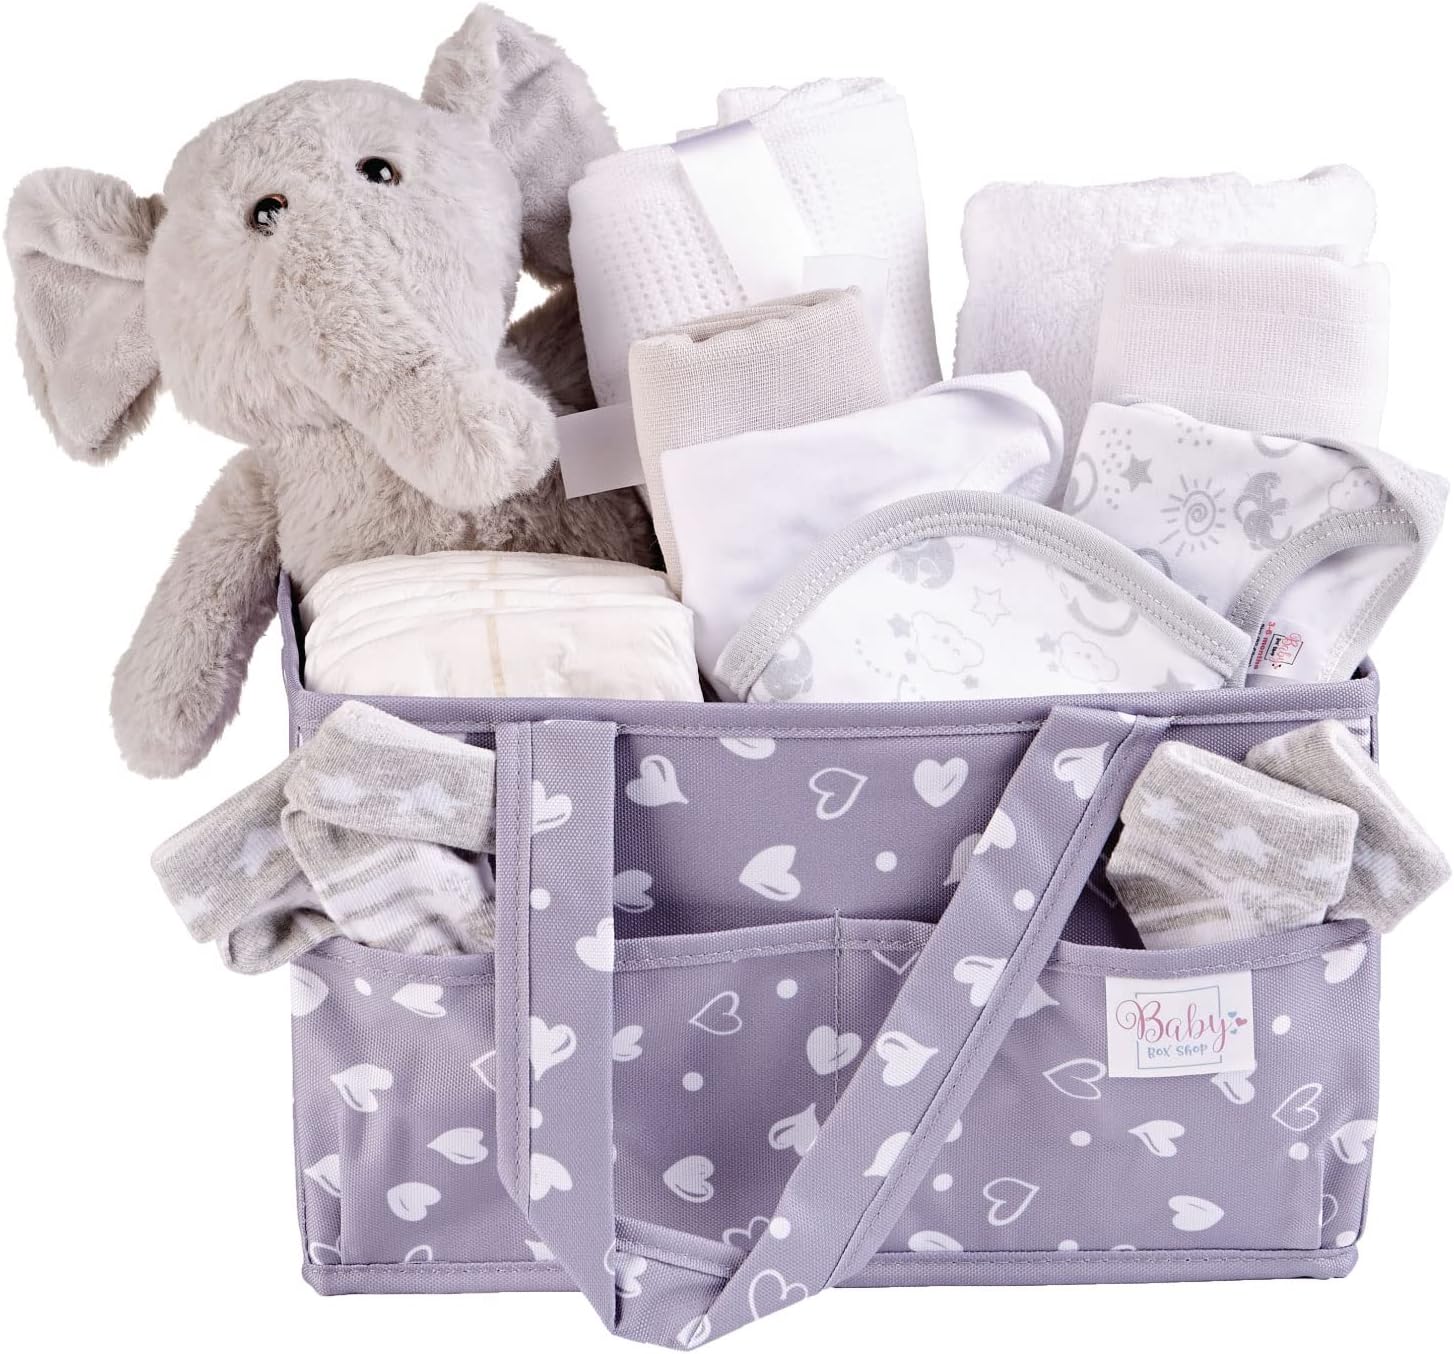 Baby Box Shop - New Born Baby Essentials, New Baby Gifts, Newborn Baby Clothes, Gift Hamper, Baby Hamper, New Parents Gifts, Baby Gift Set, Baby Gifts